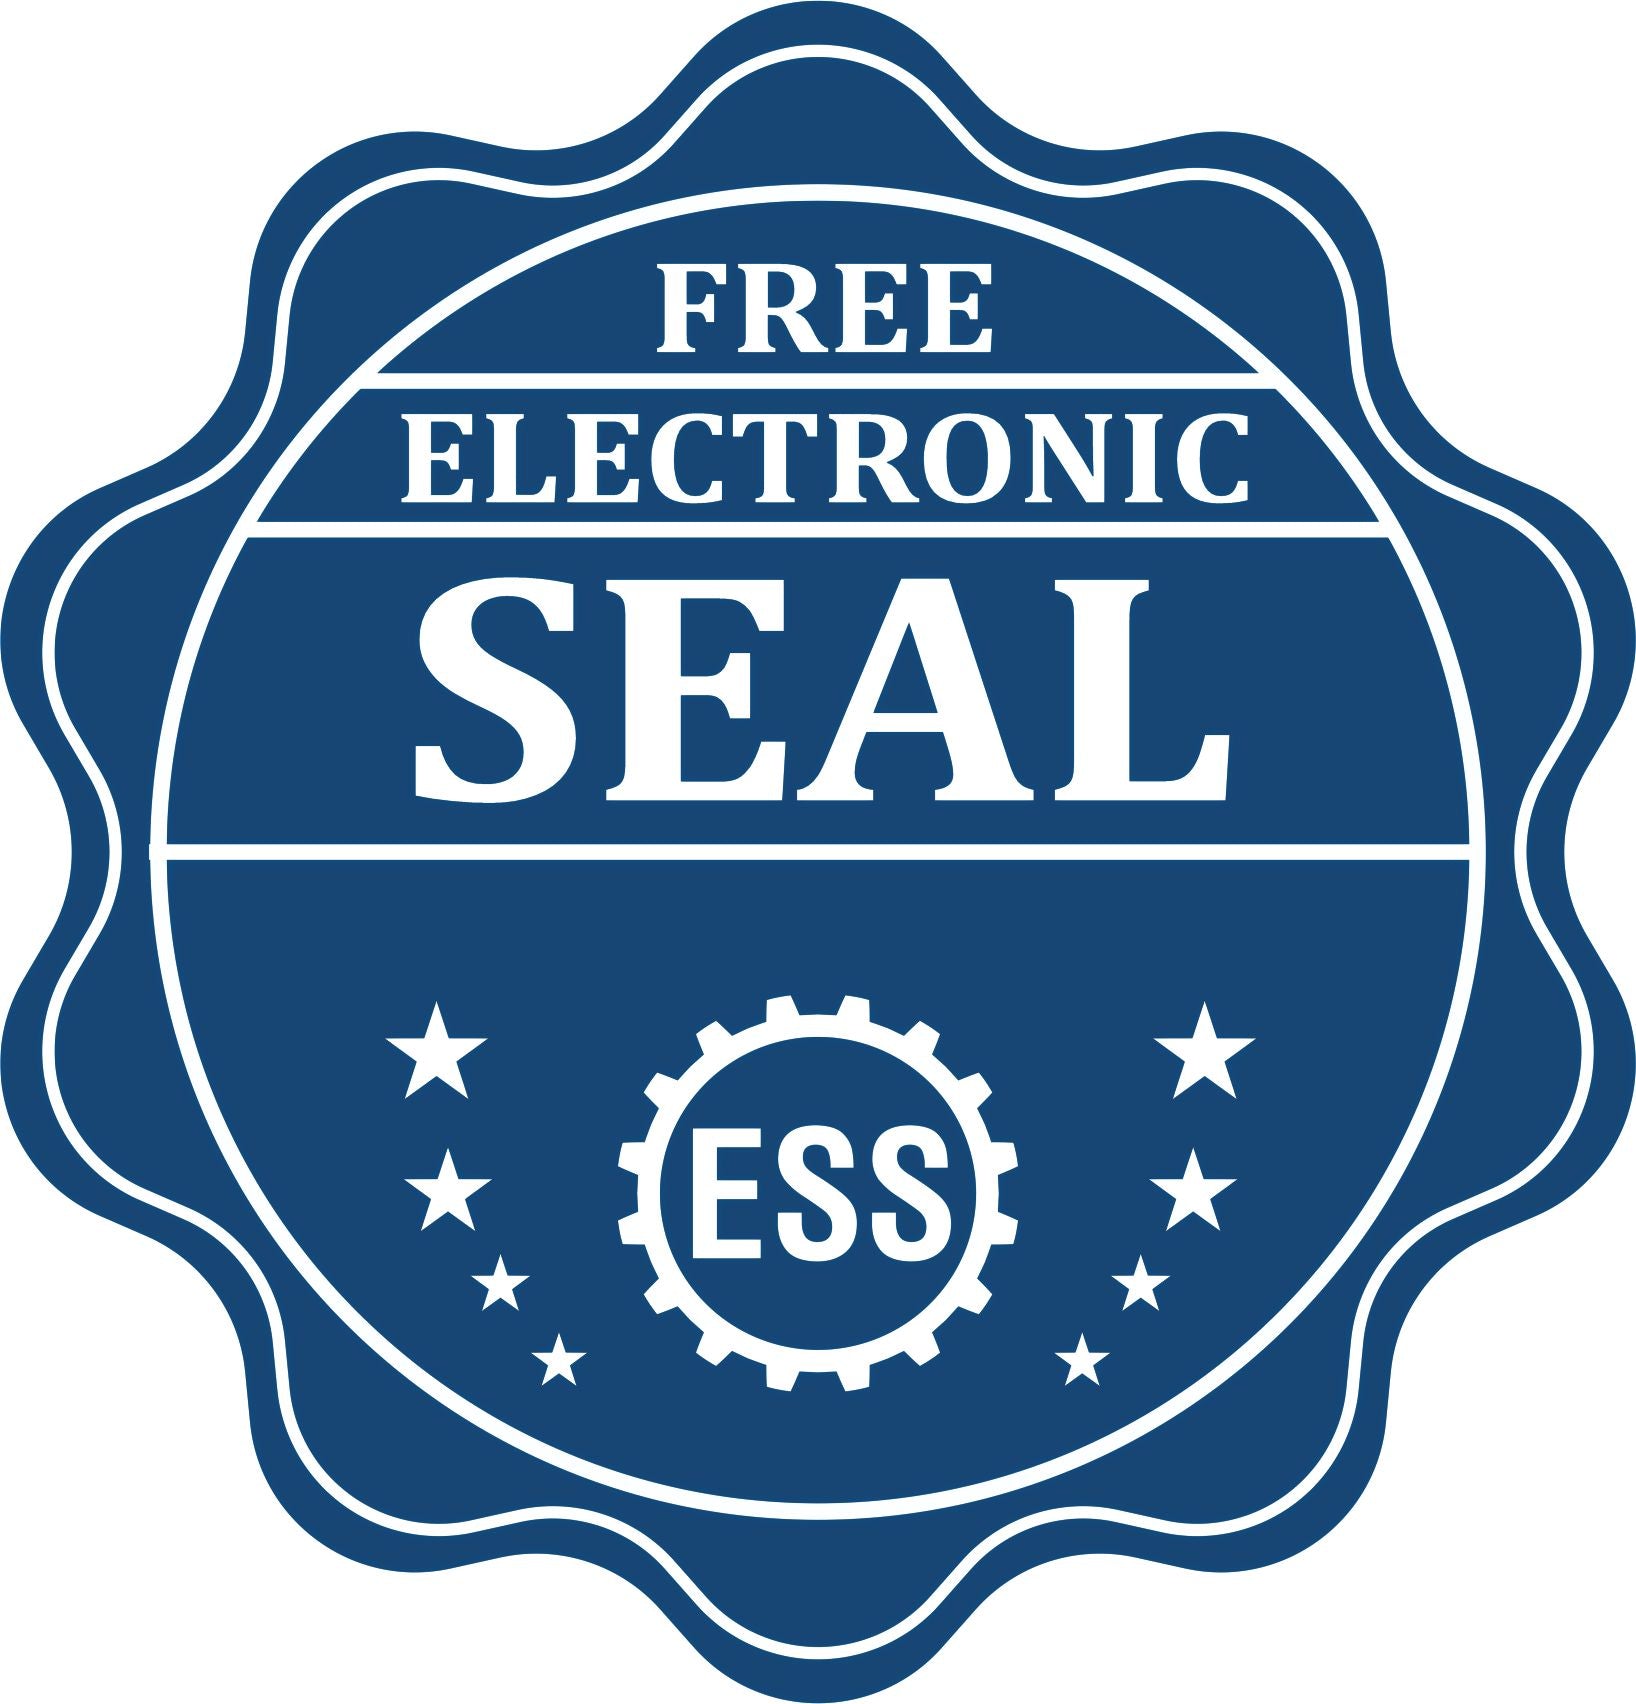 A badge showing a free electronic seal for the State of Virginia Extended Long Reach Geologist Seal with stars and the ESS gear on the emblem.